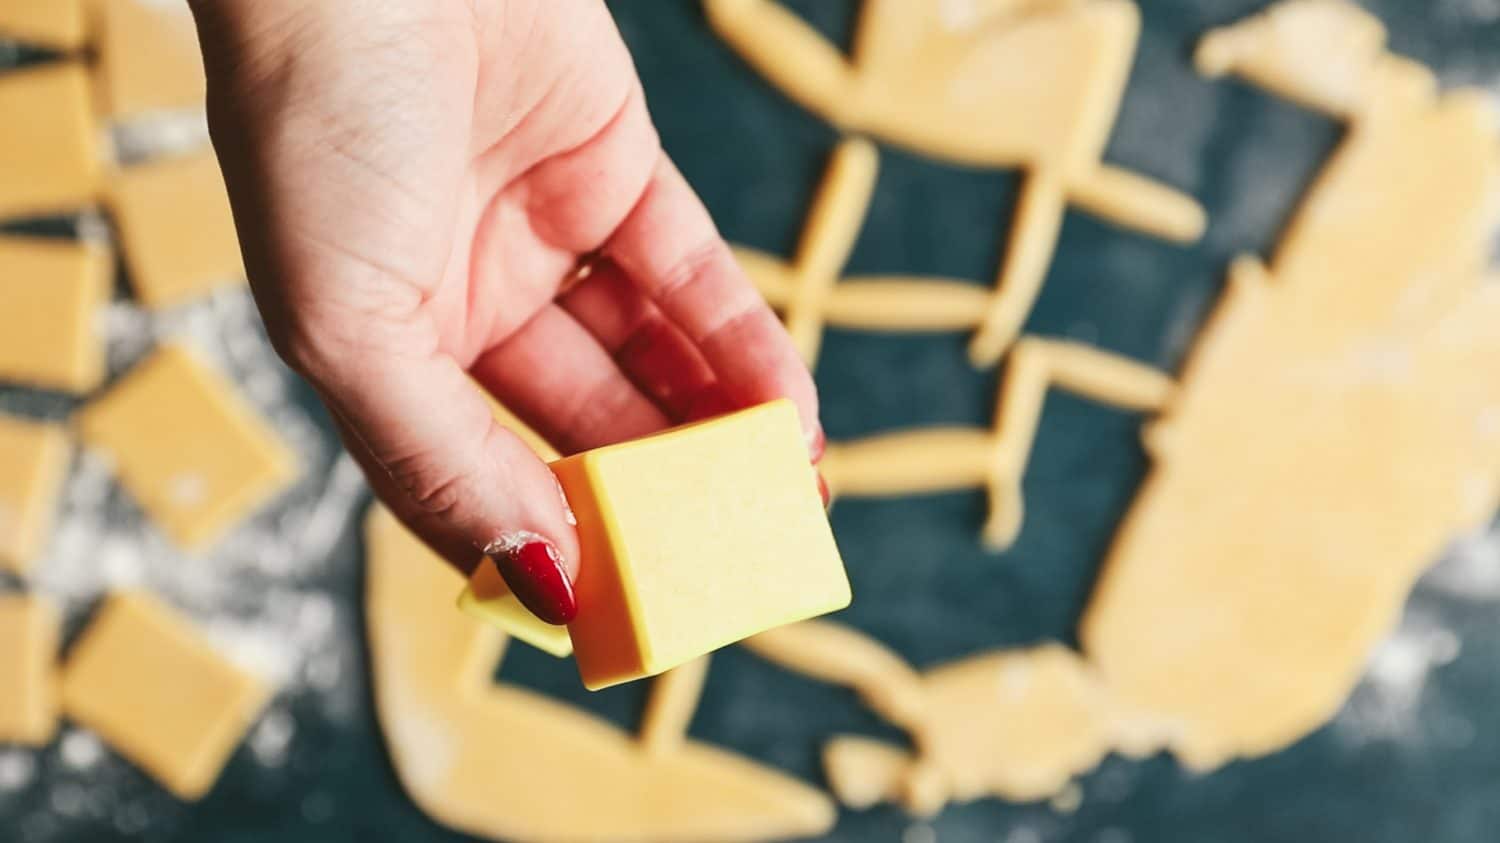 The inside of a biscuit cutter.